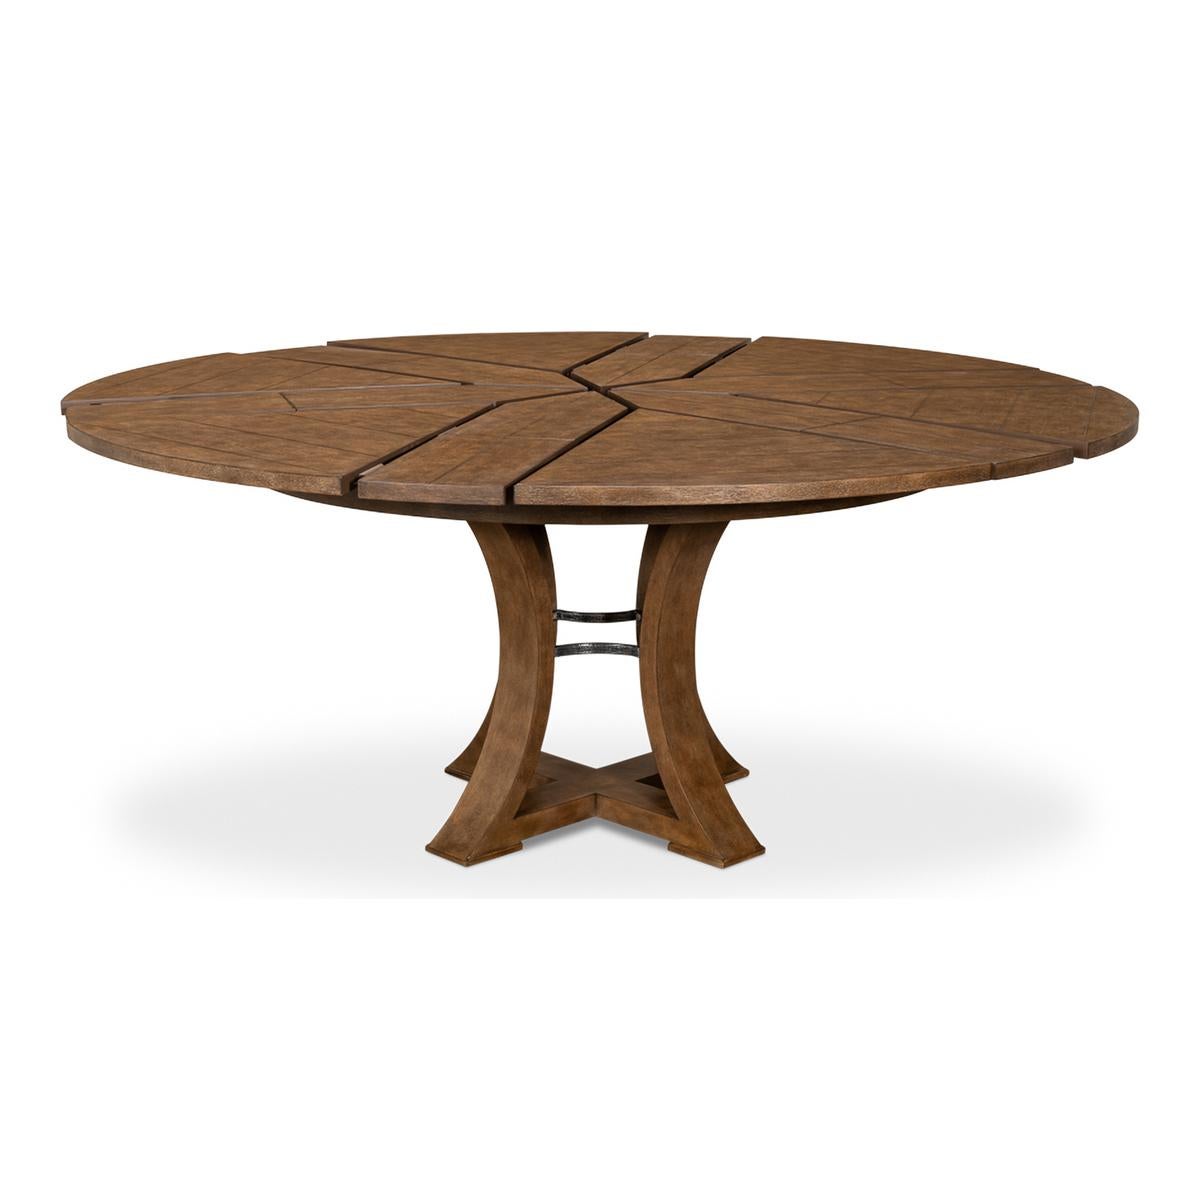 Modern Transitional Dining Table, 70, Muted Brown In New Condition For Sale In Westwood, NJ